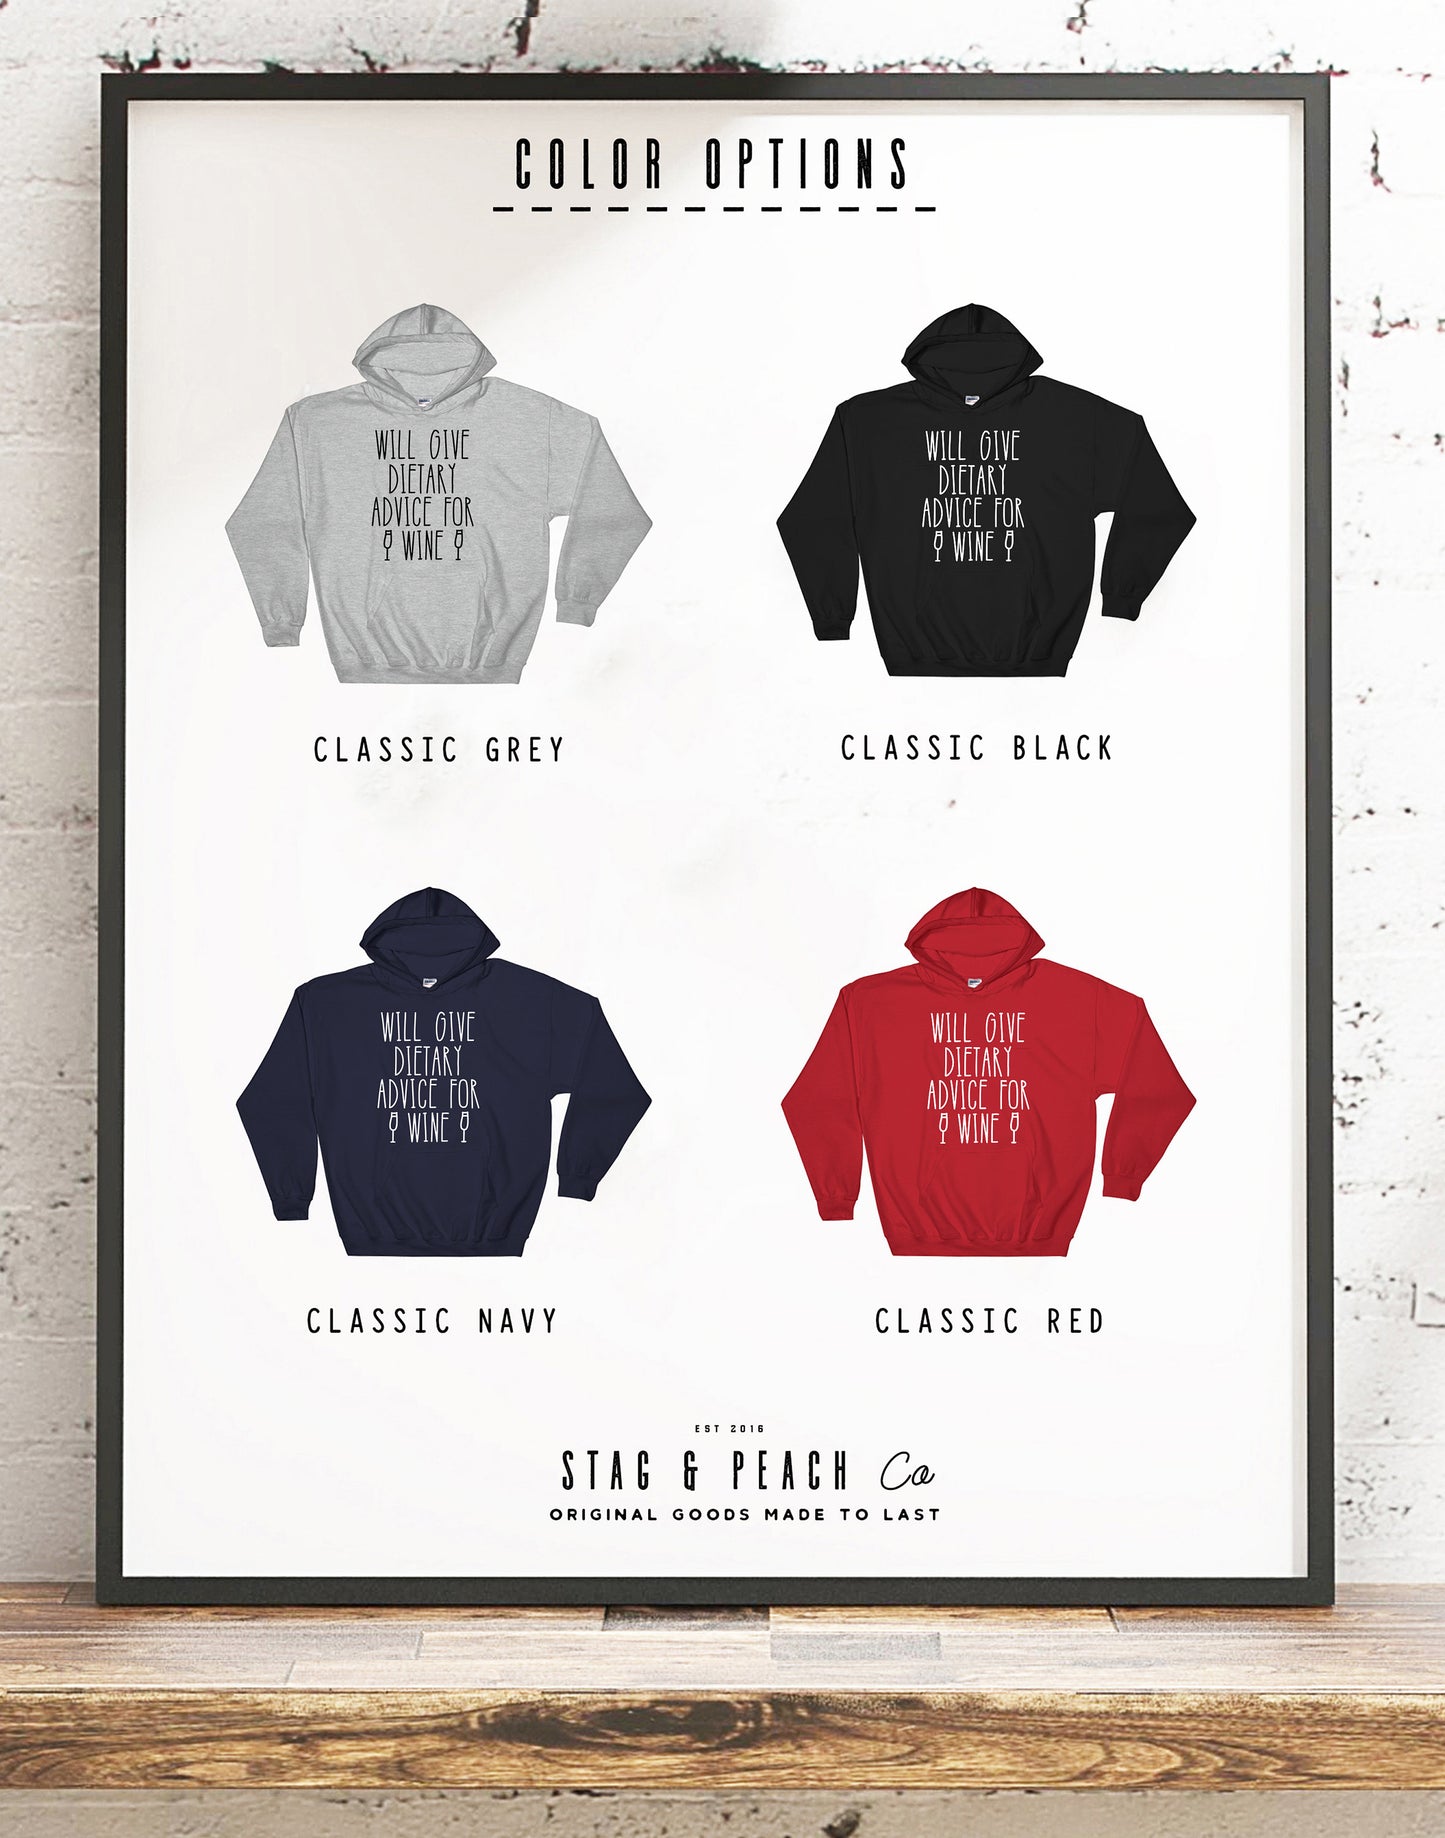 Will Give Dietary Advice For Wine Hoodie - Dietitian Shirt, Dietician Shirt, Nutritionist Shirt, RDN Shirt, Registered Dietitian Shirt